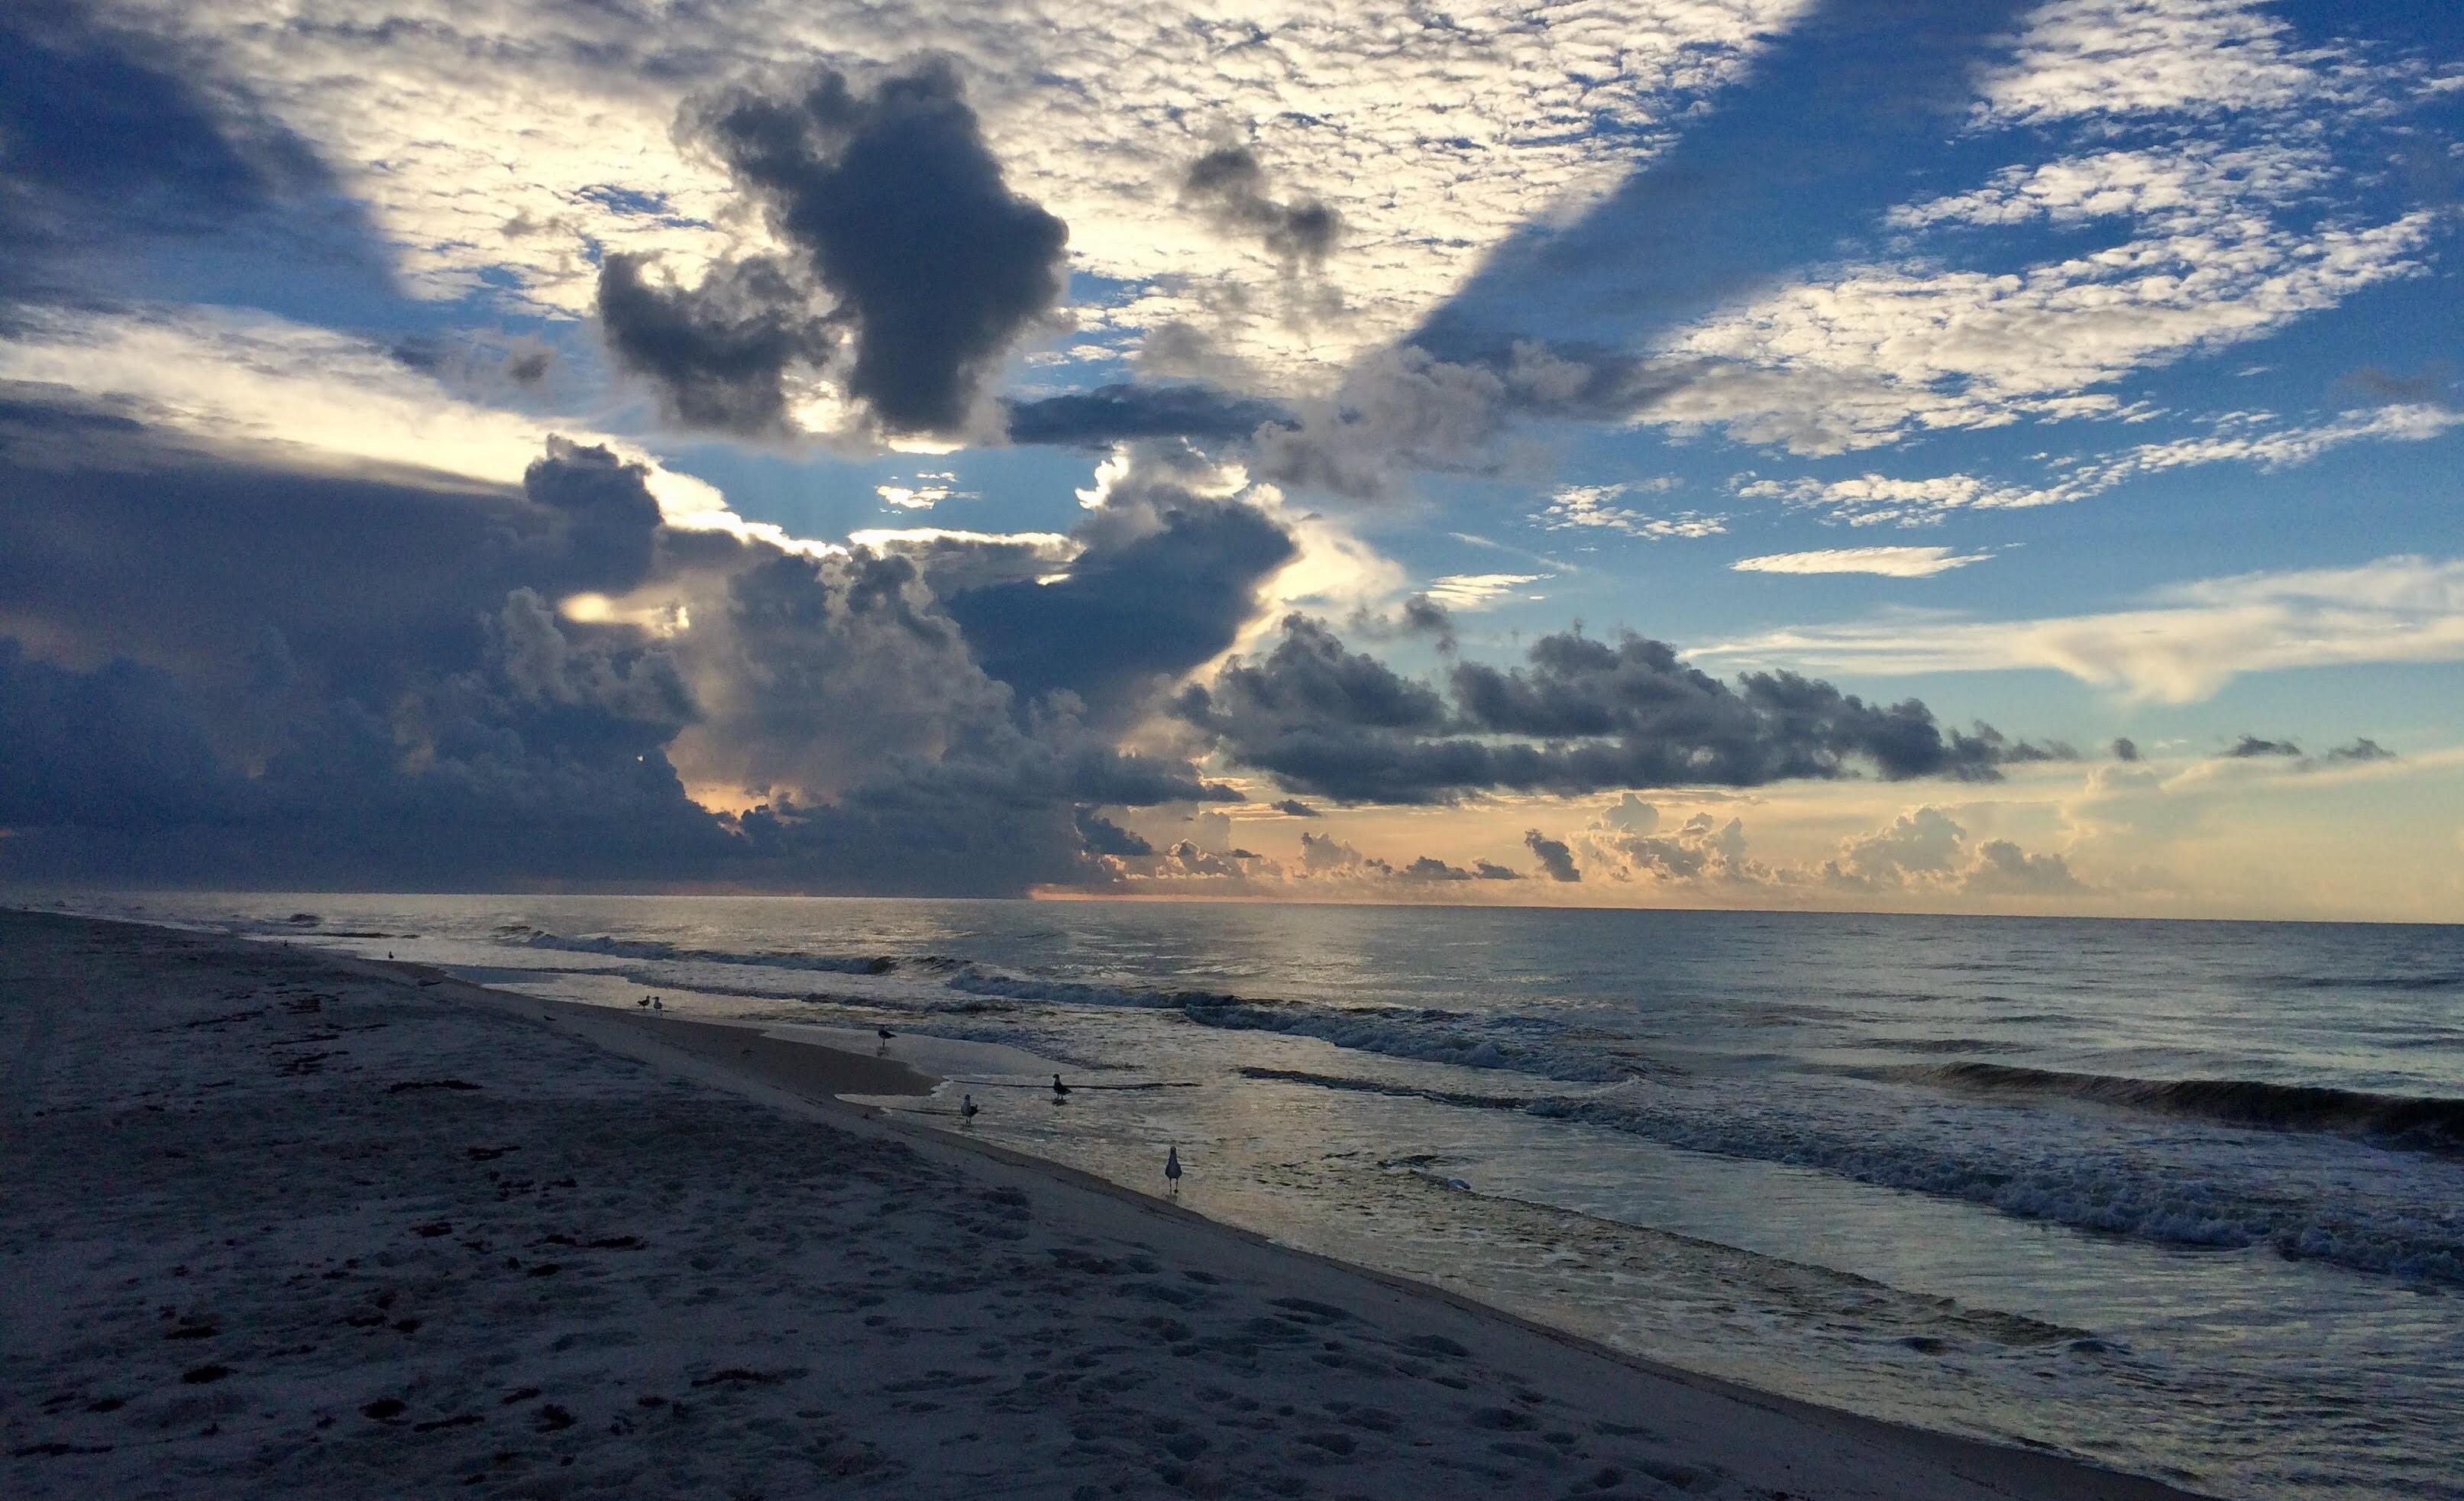 Sunrise on the Beach at Gulf State Park. Photo by Farren Dell